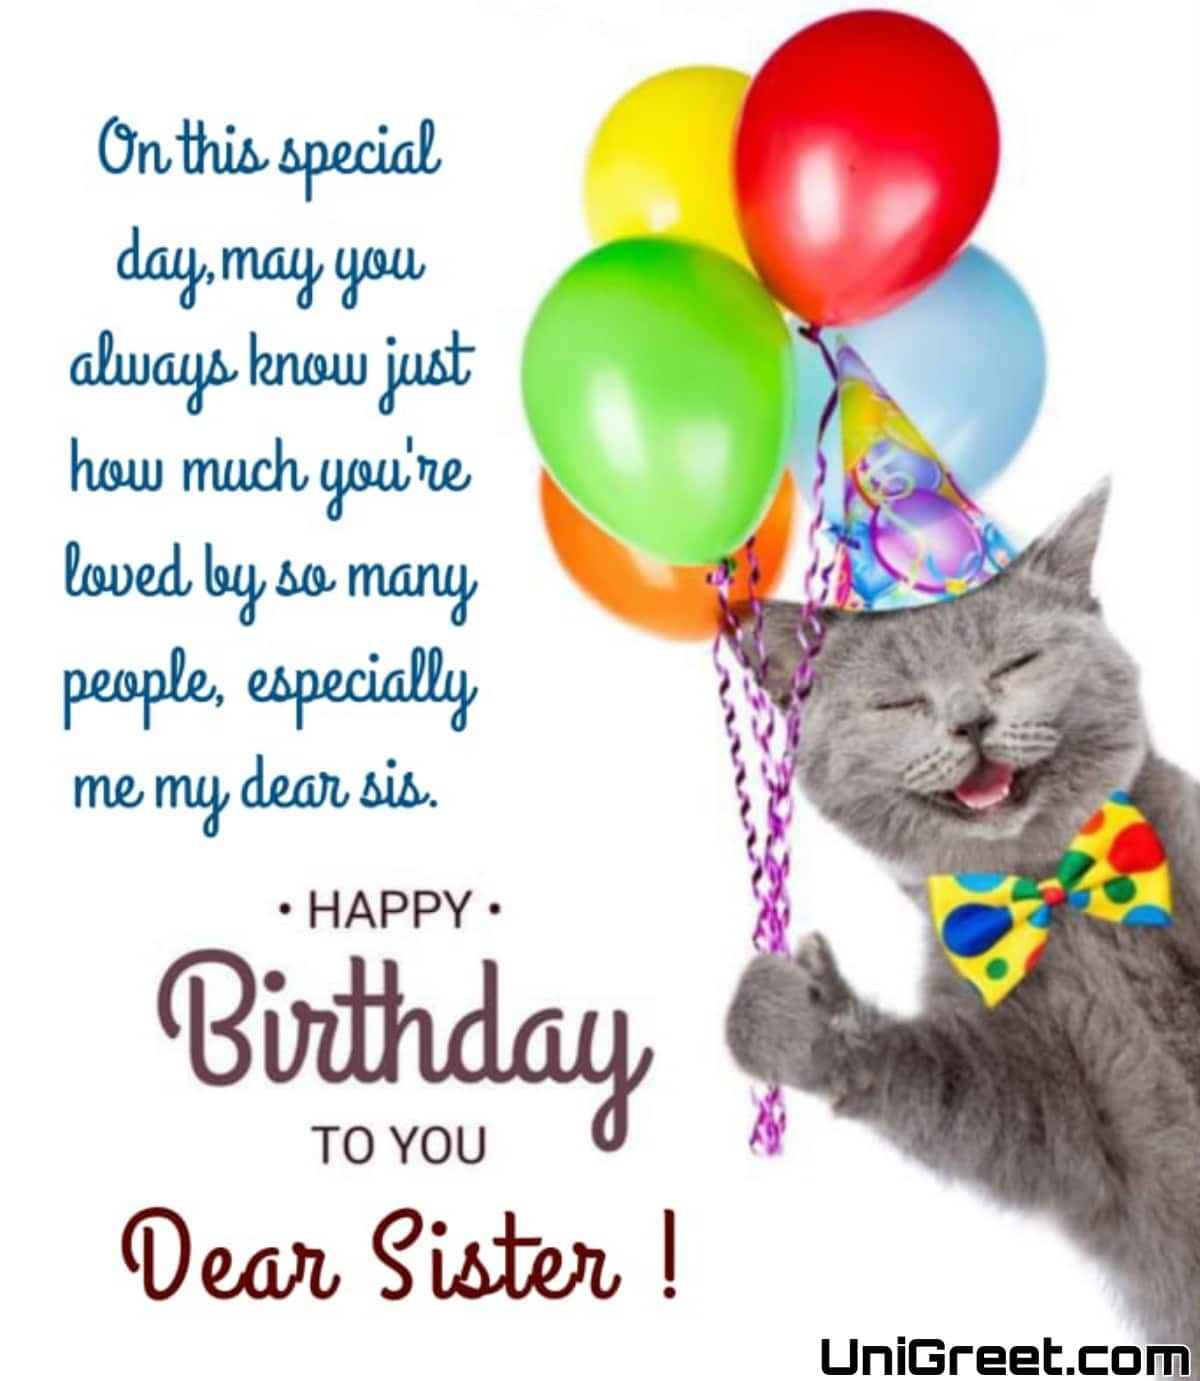 Happy Birthday Wishes For Sister Wallpapers Cards Images Photos